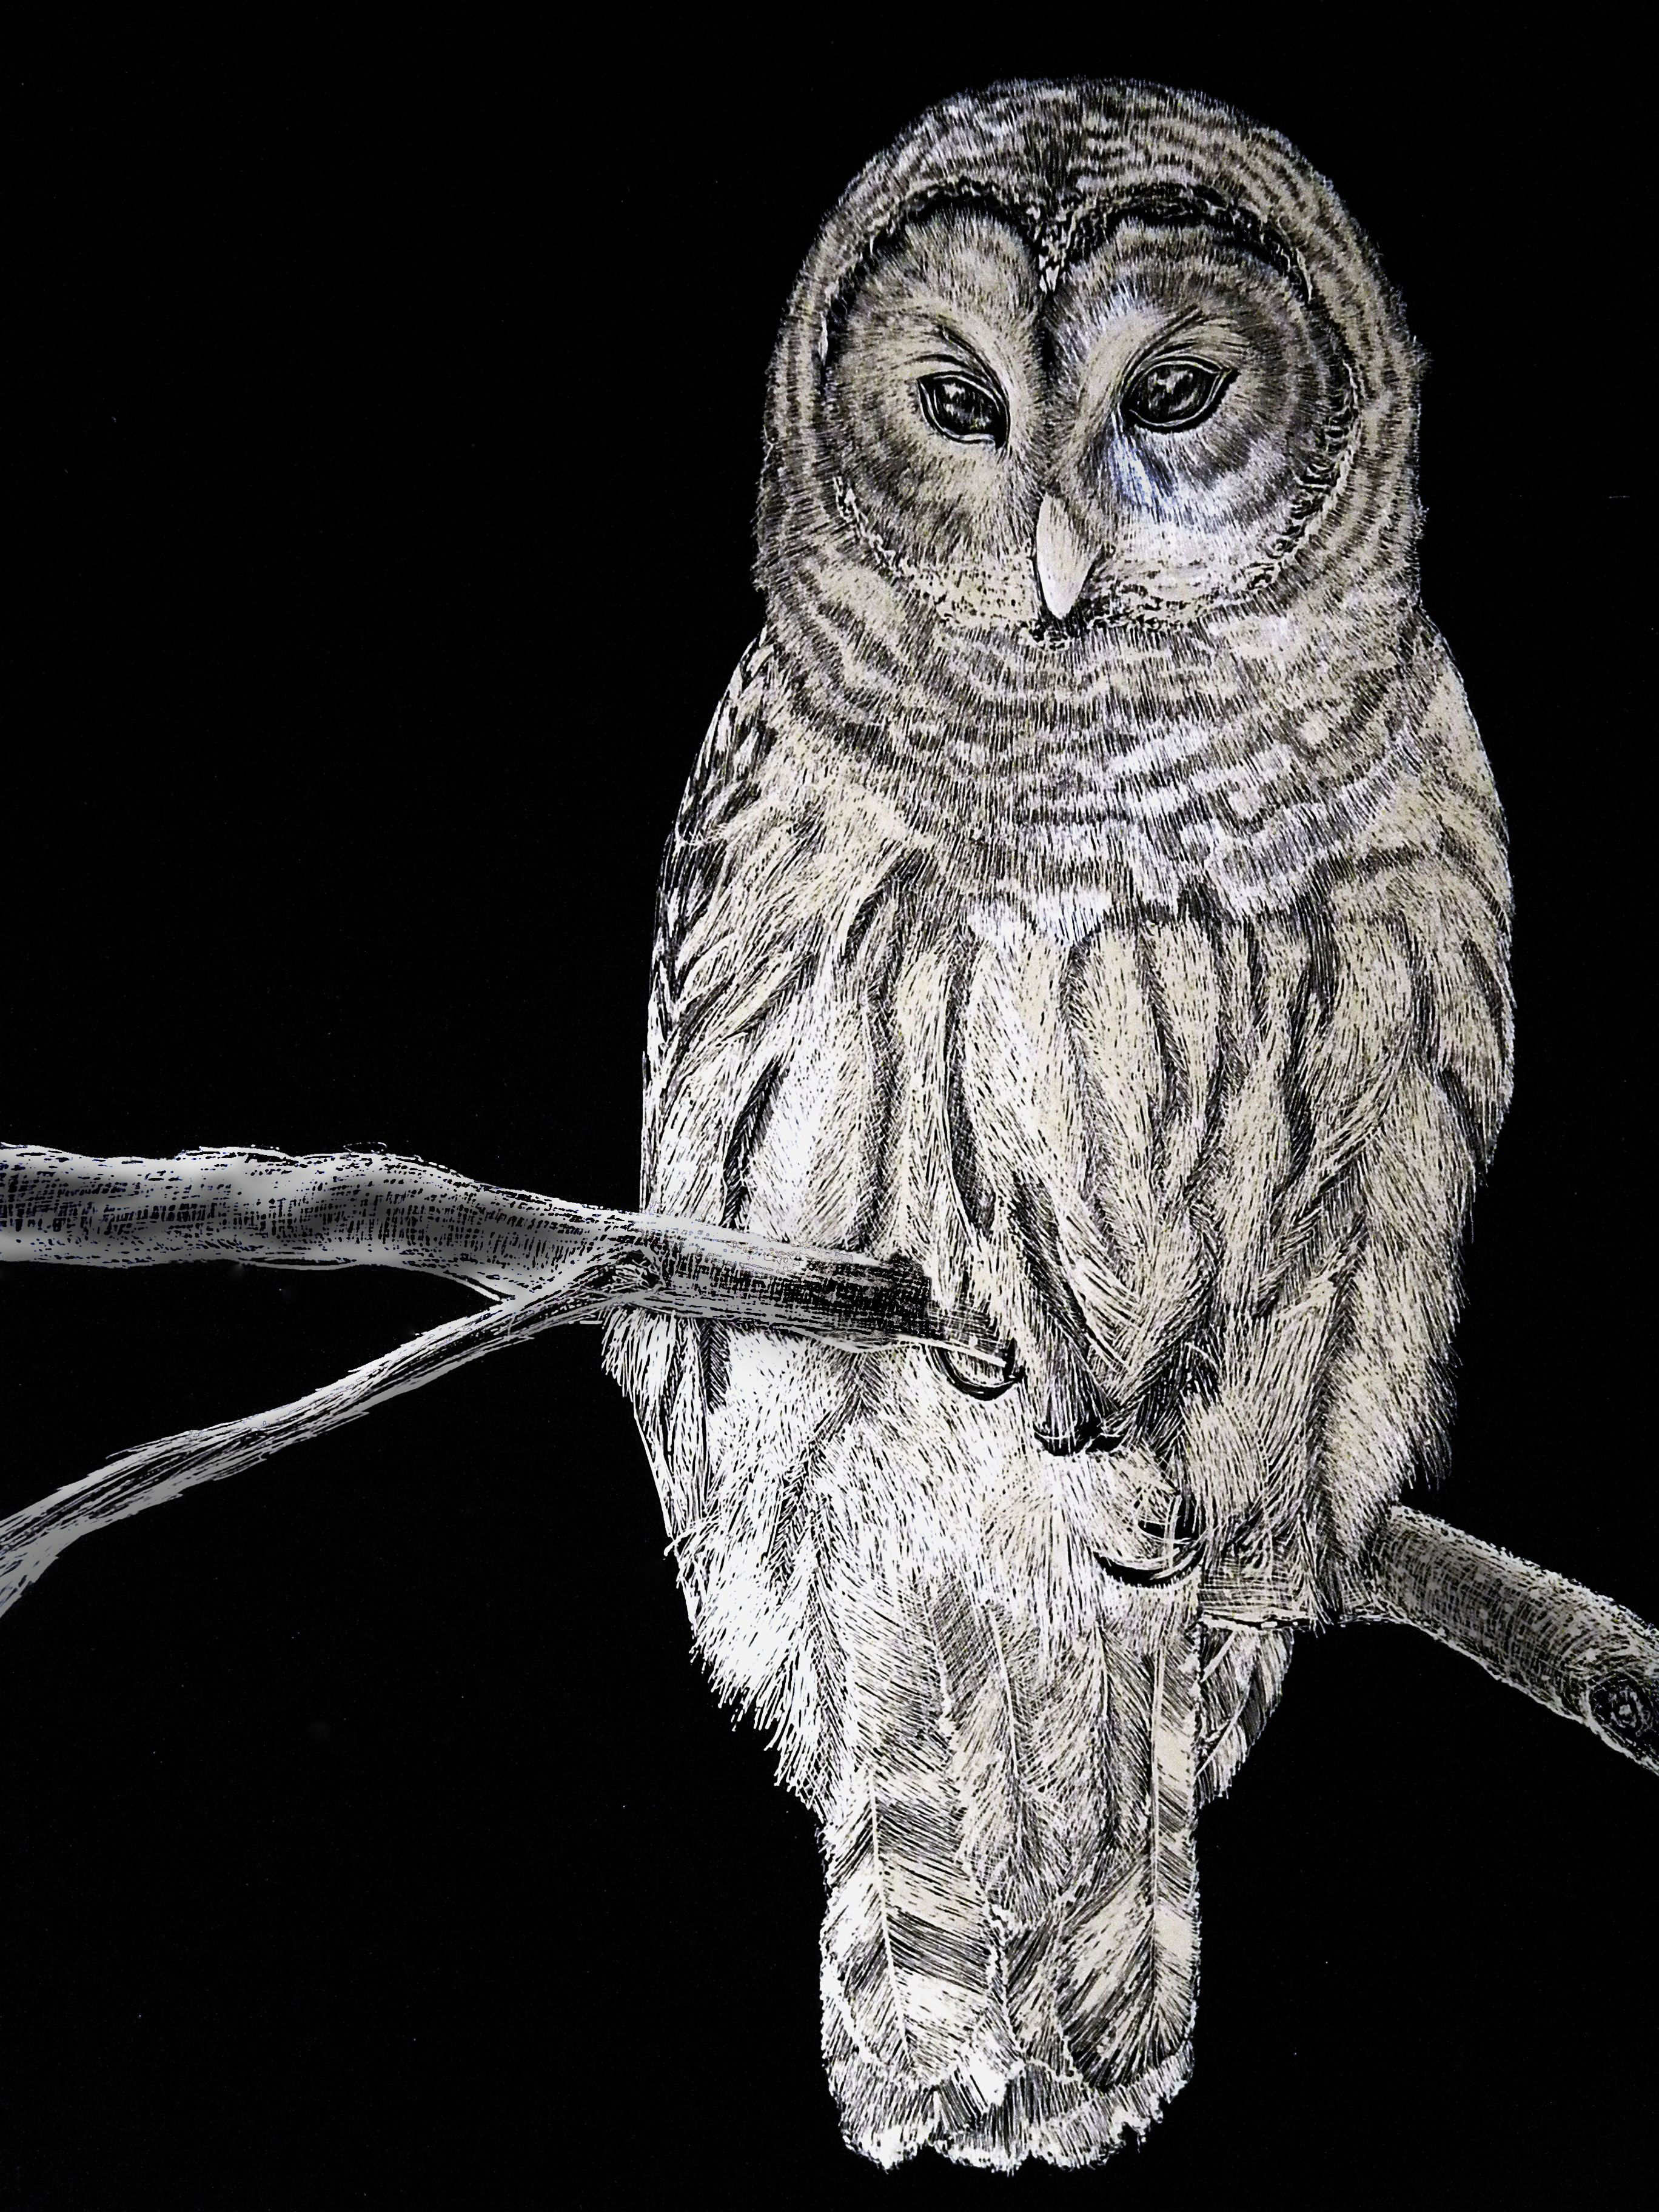 A scratchboard etching of a very serious owl.